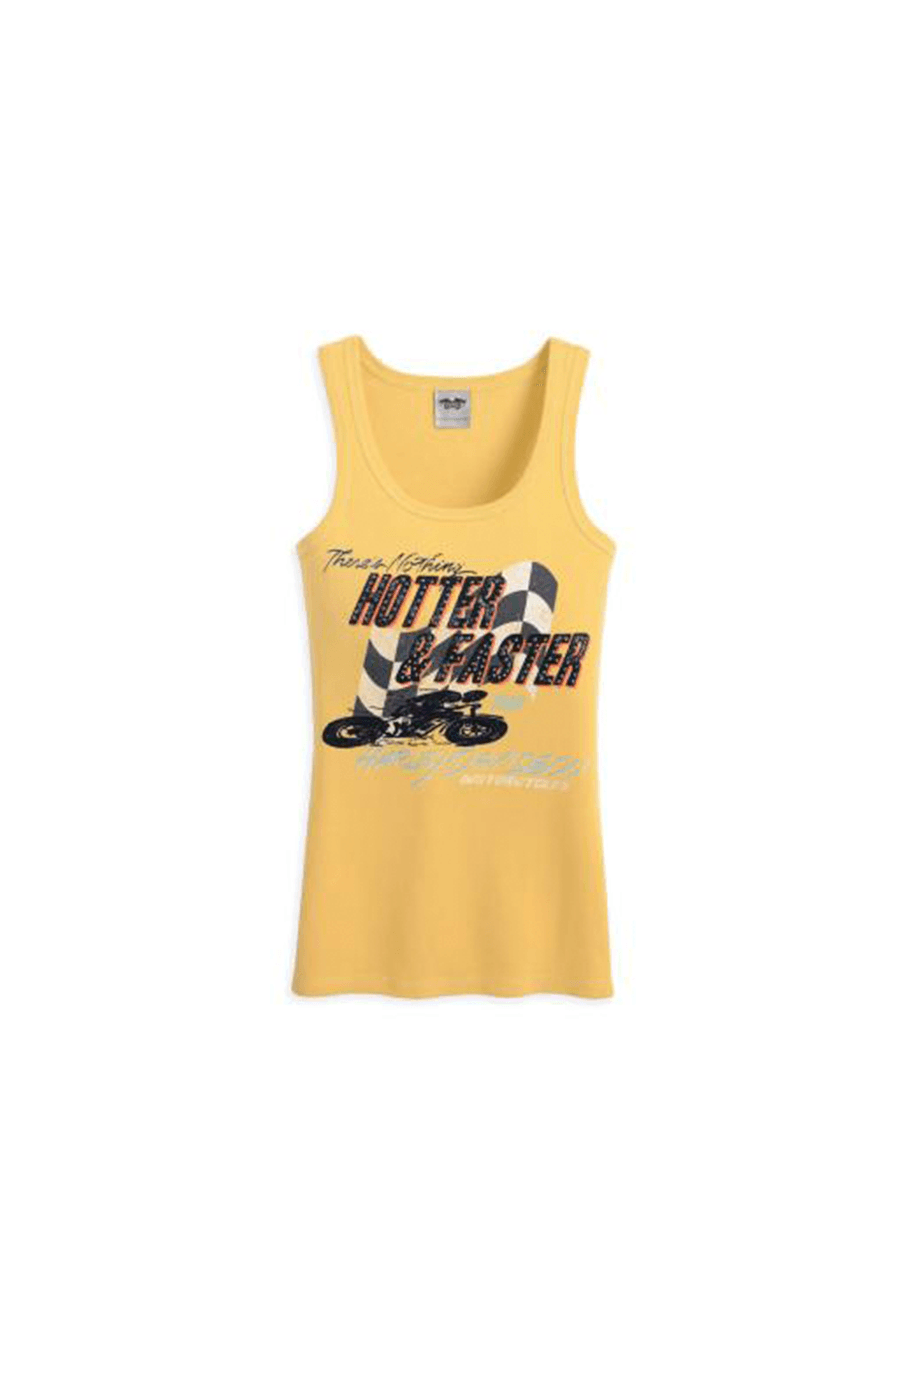 Harley-Davidson® Tank-Hotter And Faster, Y